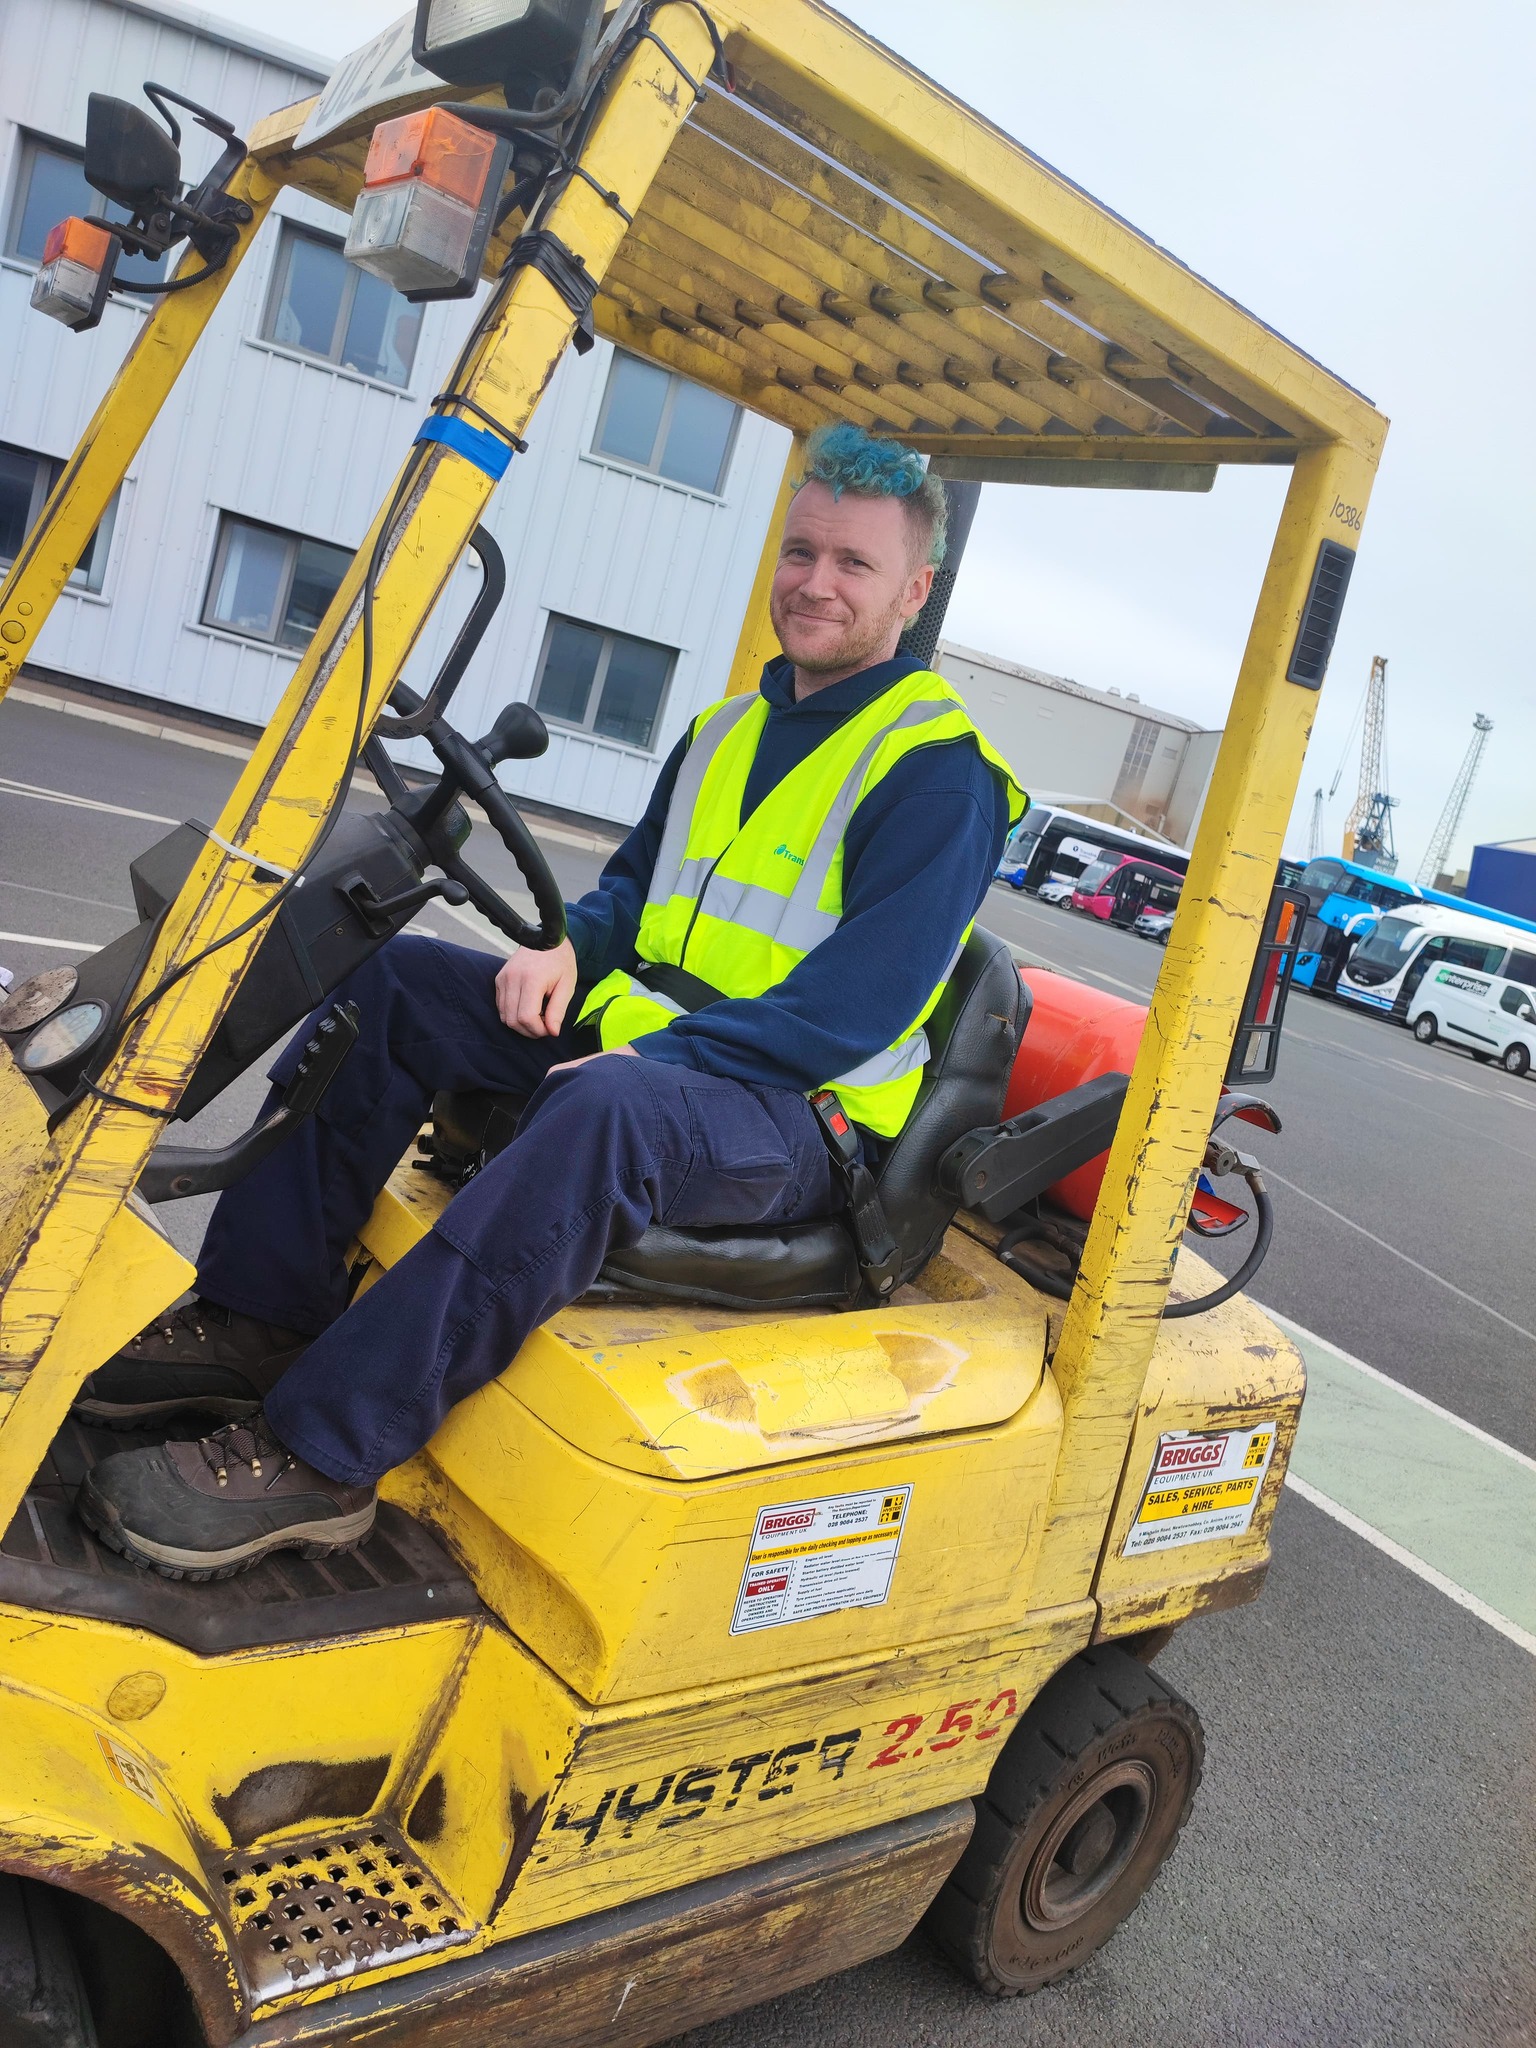 Why Forklift Safety Training Is Vital near me